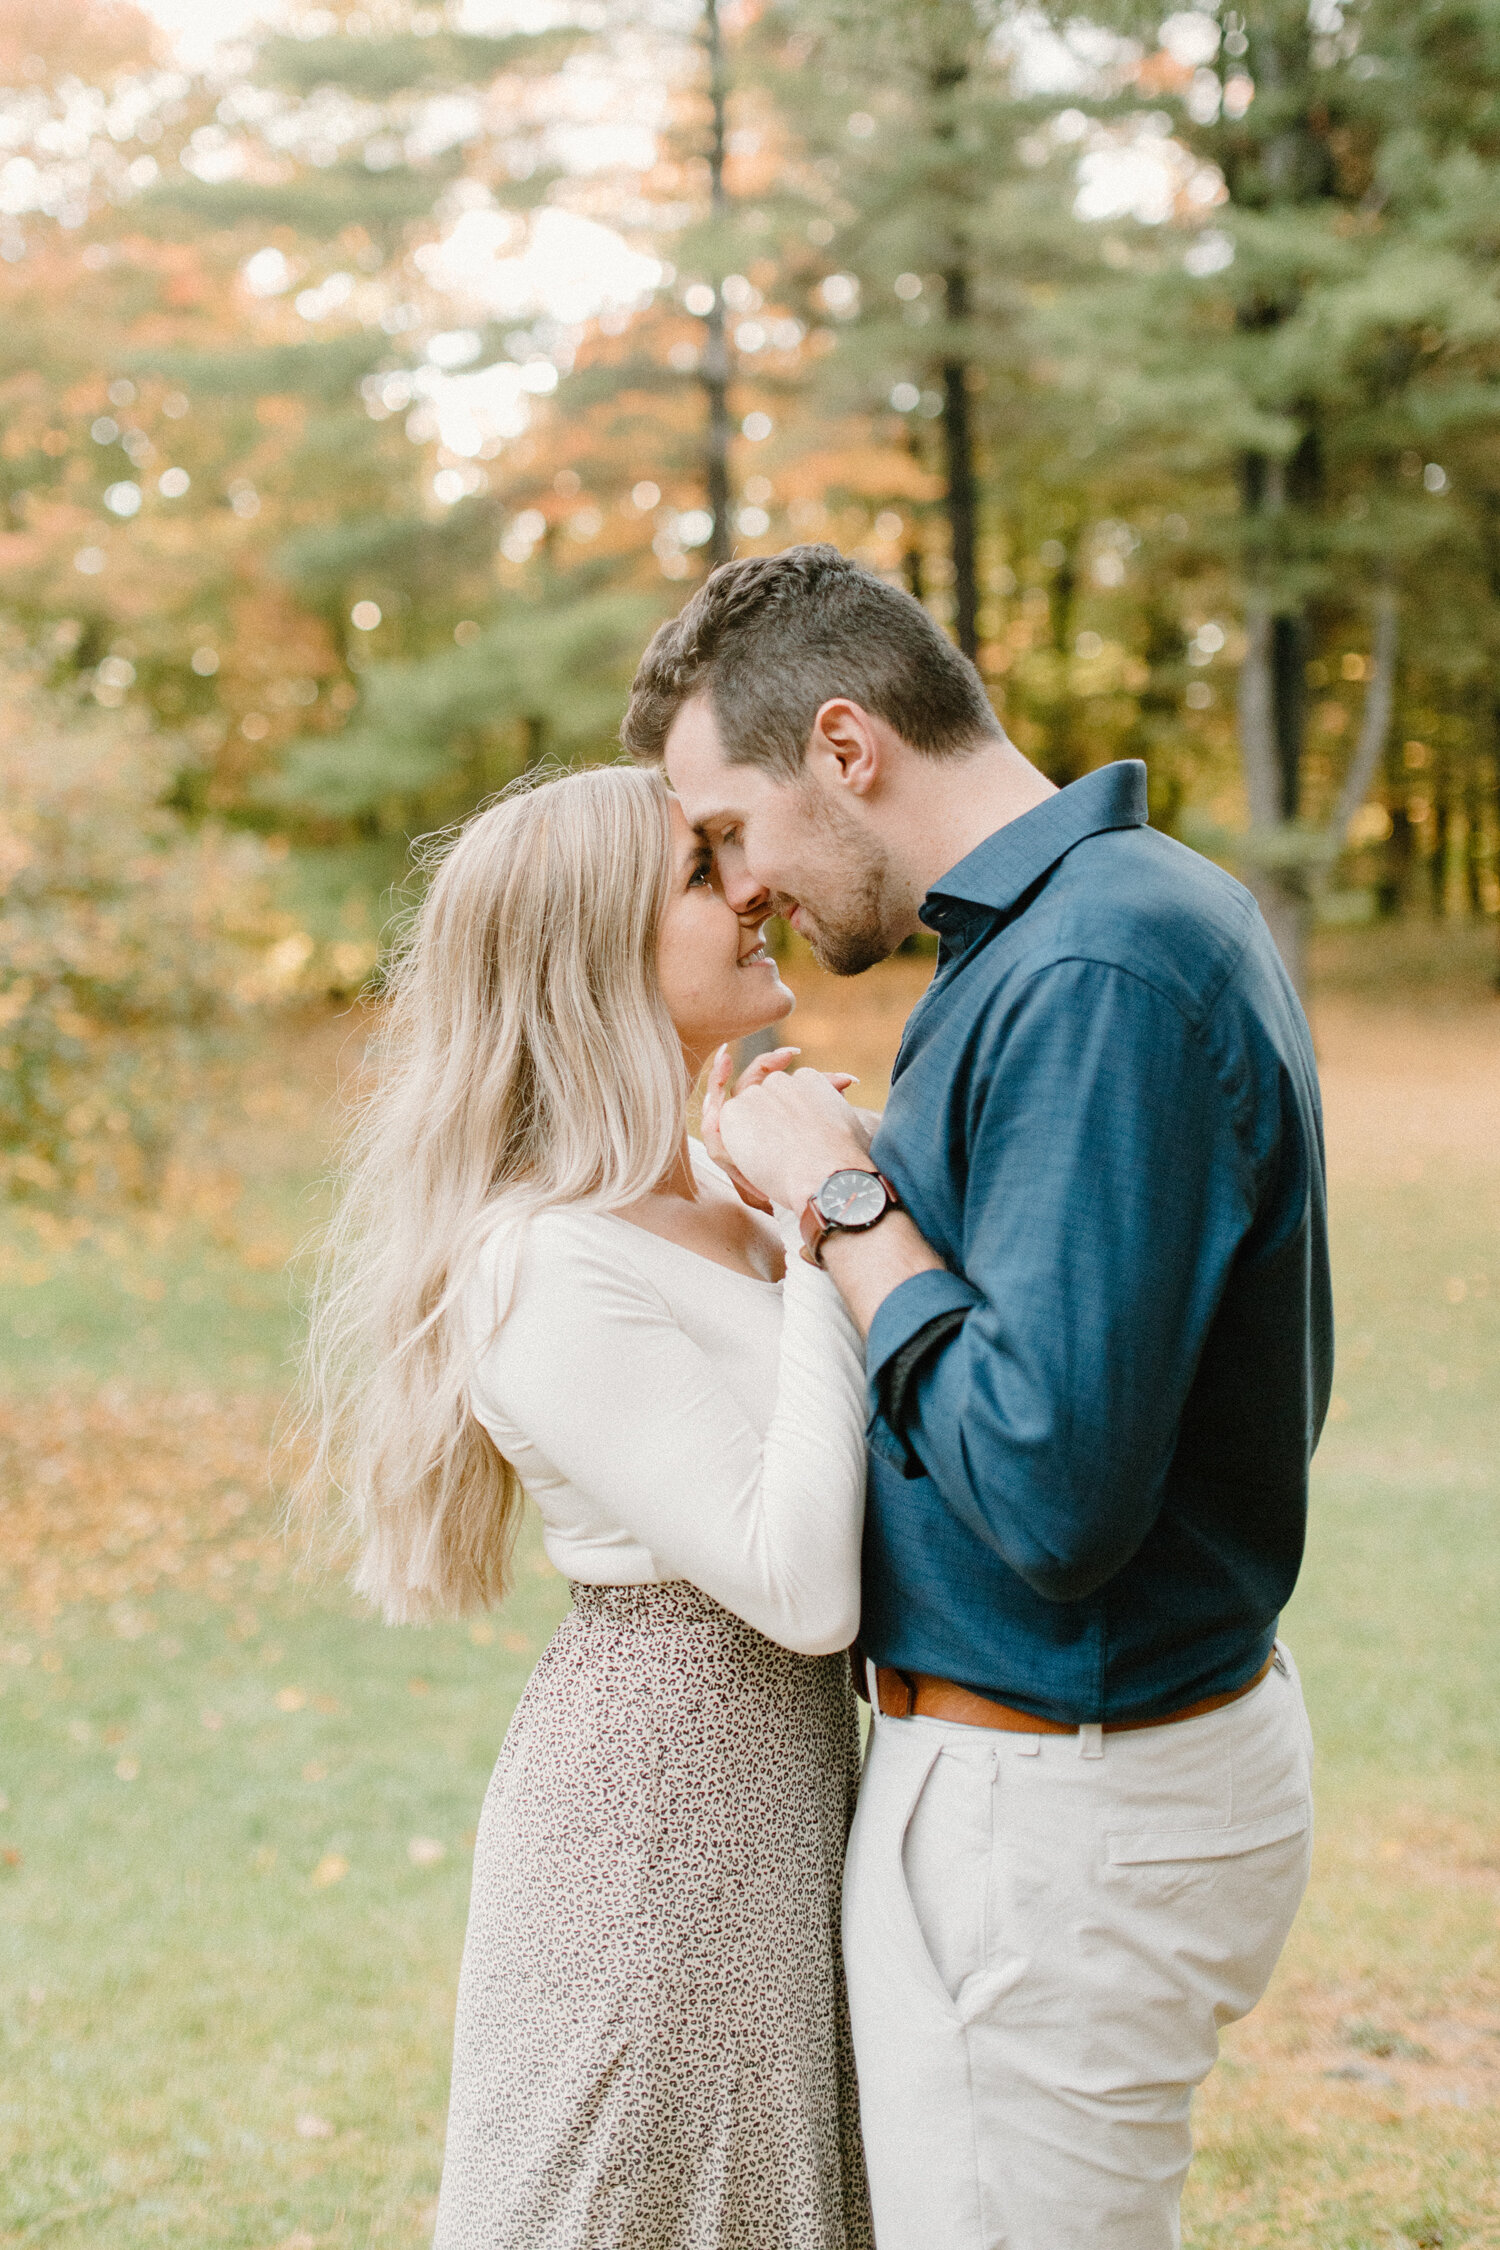  With orange autumn leaved blurred in the backdrop, Chelsea Mason Photography captures this Quebec, Canada couple holding hands and romantically pressing their foreheads against one another. neutral colored formal engagement outfits, womens leopard p